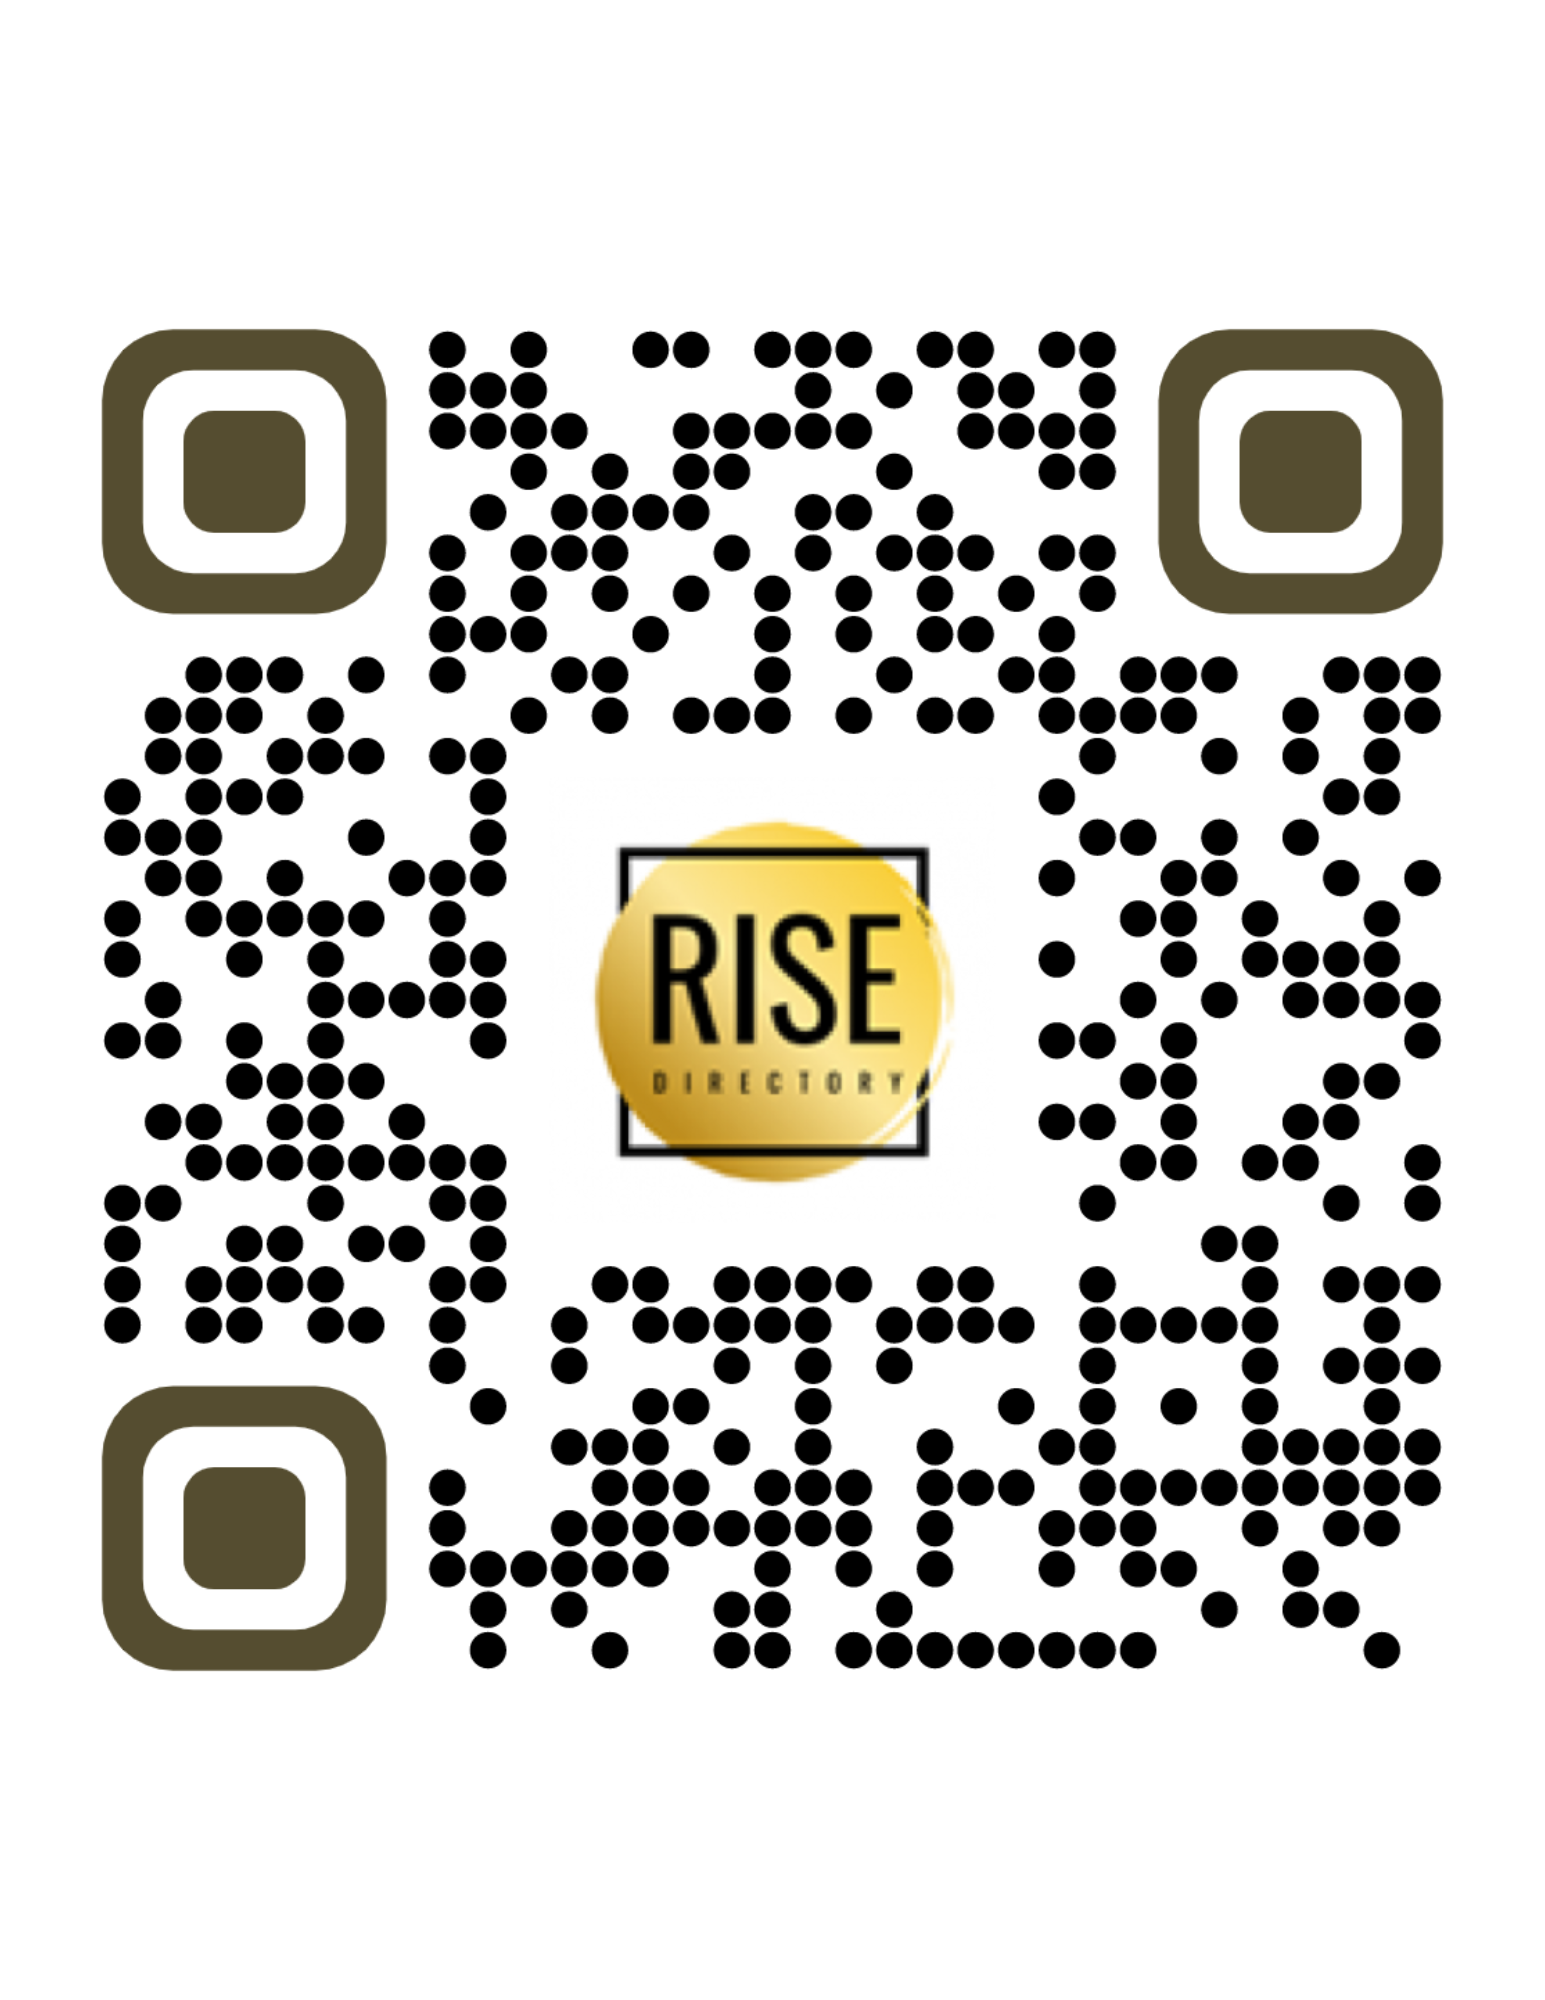 Rise Directory